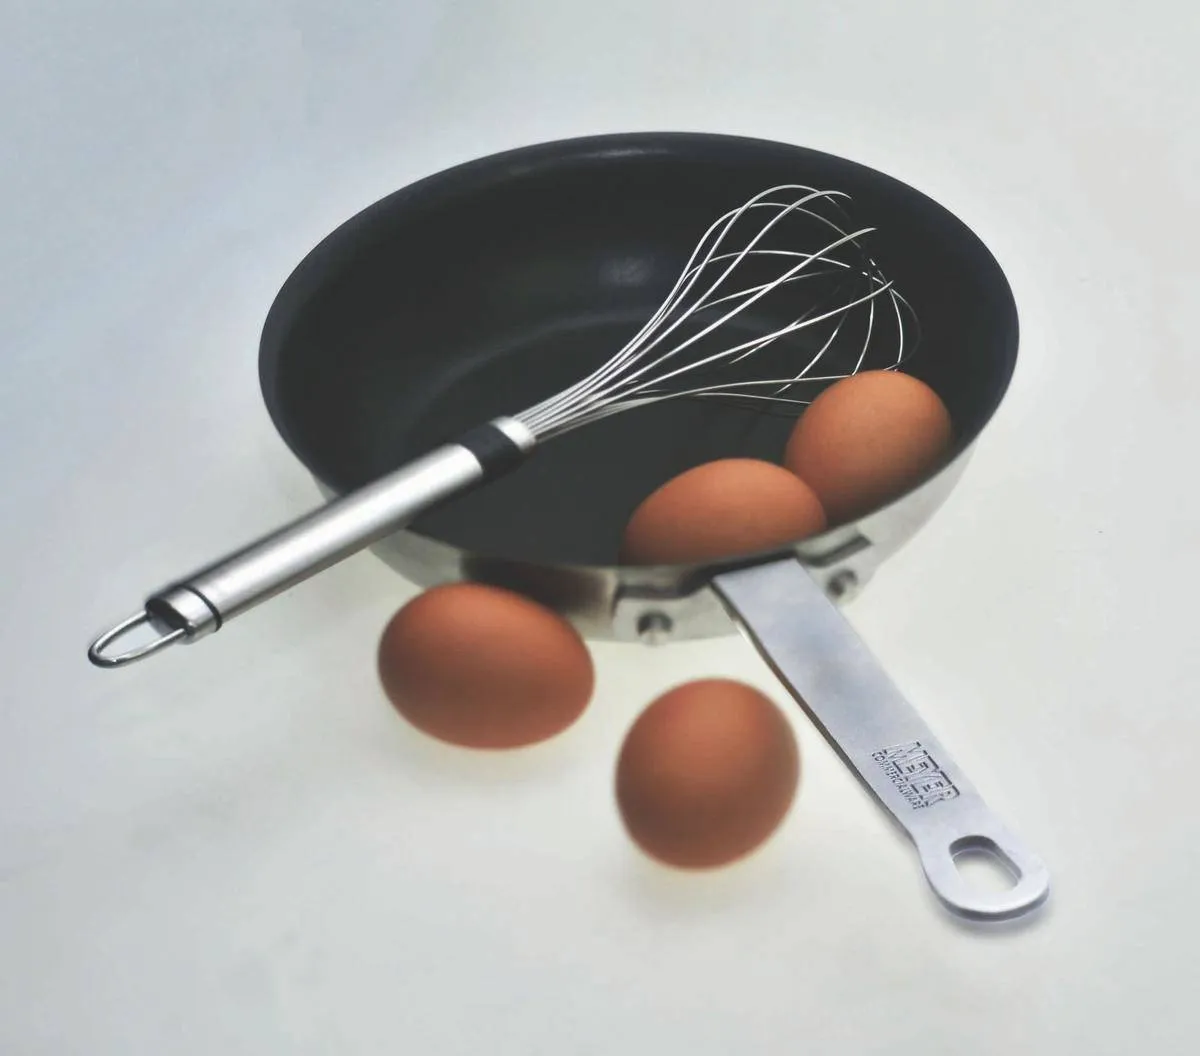 Two whole eggs in a pan with a whisk and two whole eggs outside the pan.